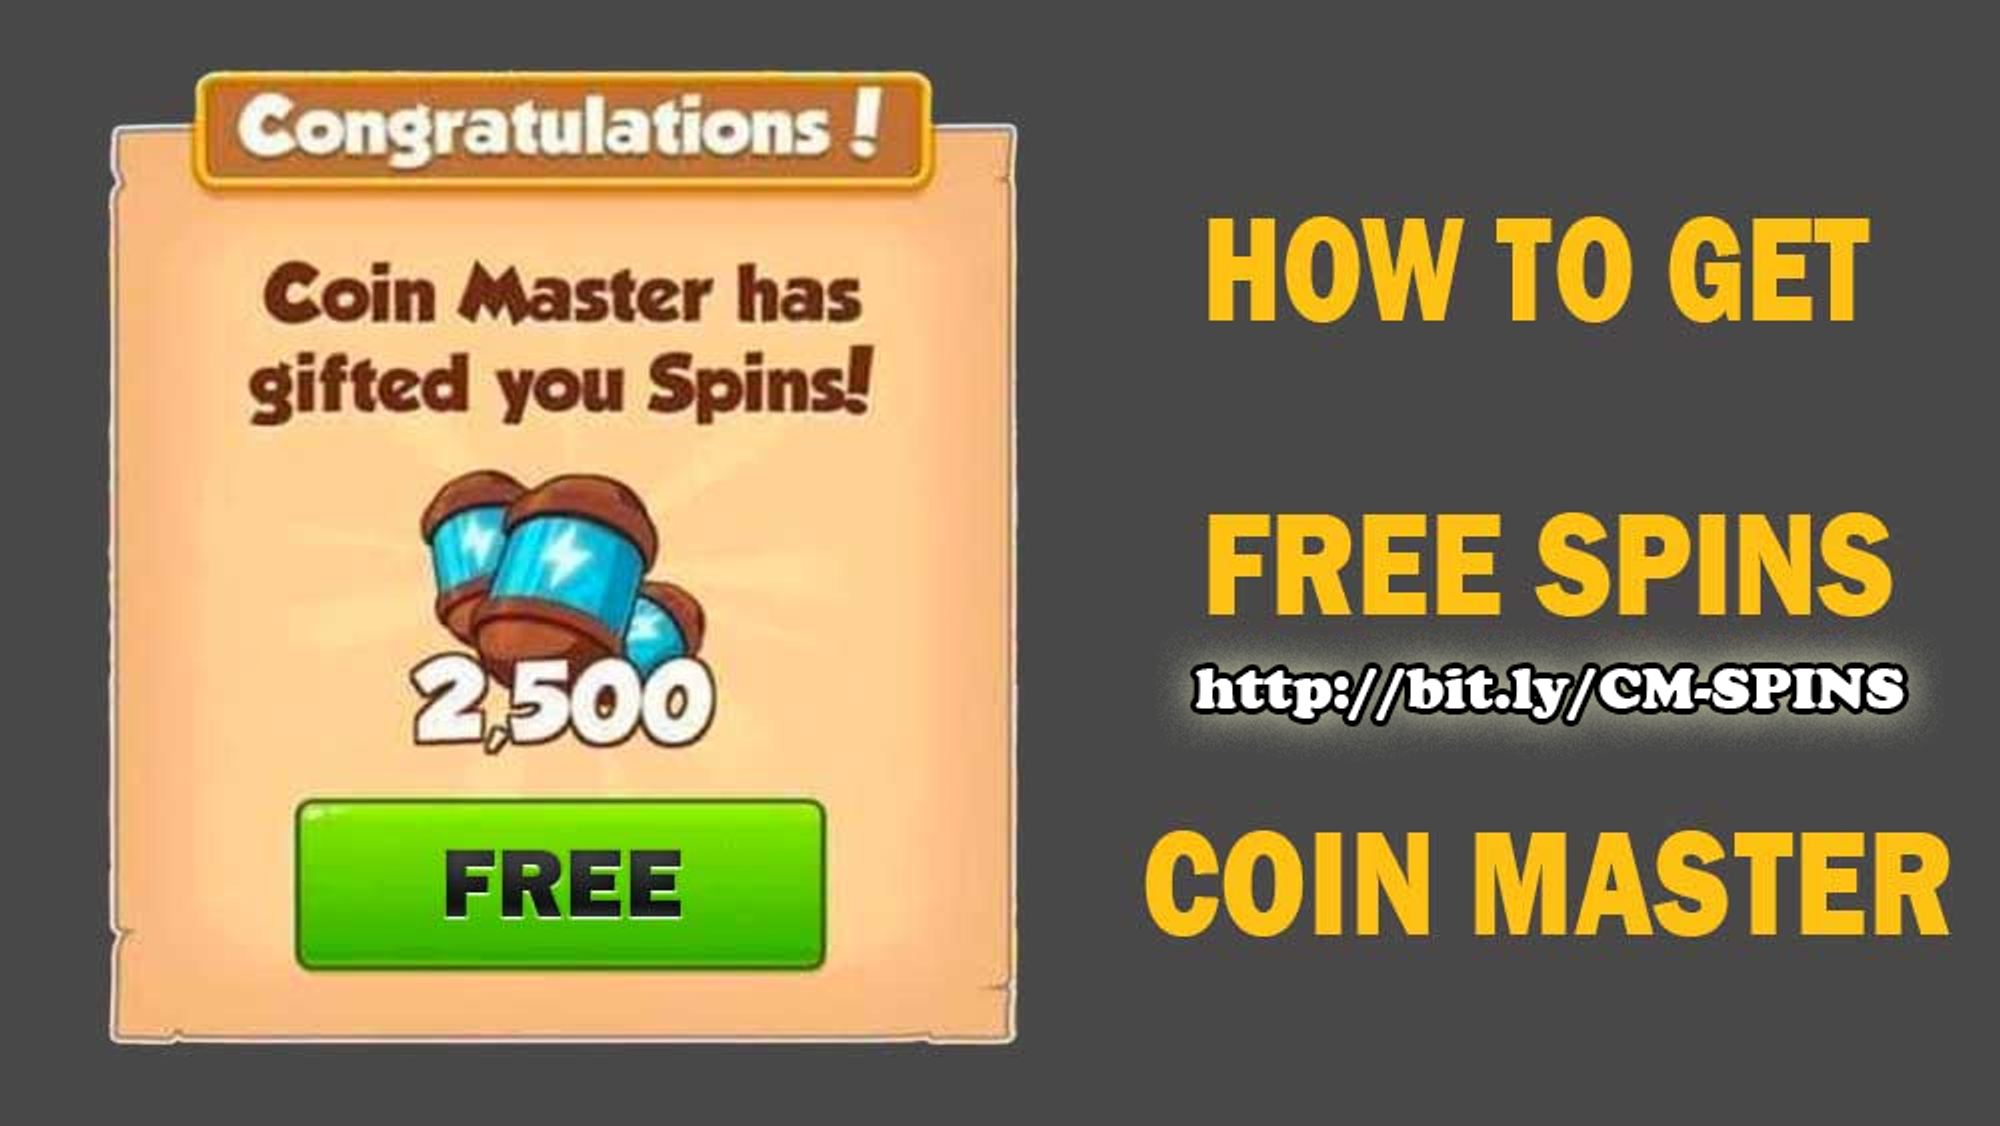 Coin Master Free Spins Link 2020 V14 Free Spins Generator Hack For Android Ios No Root Or Jailbreak